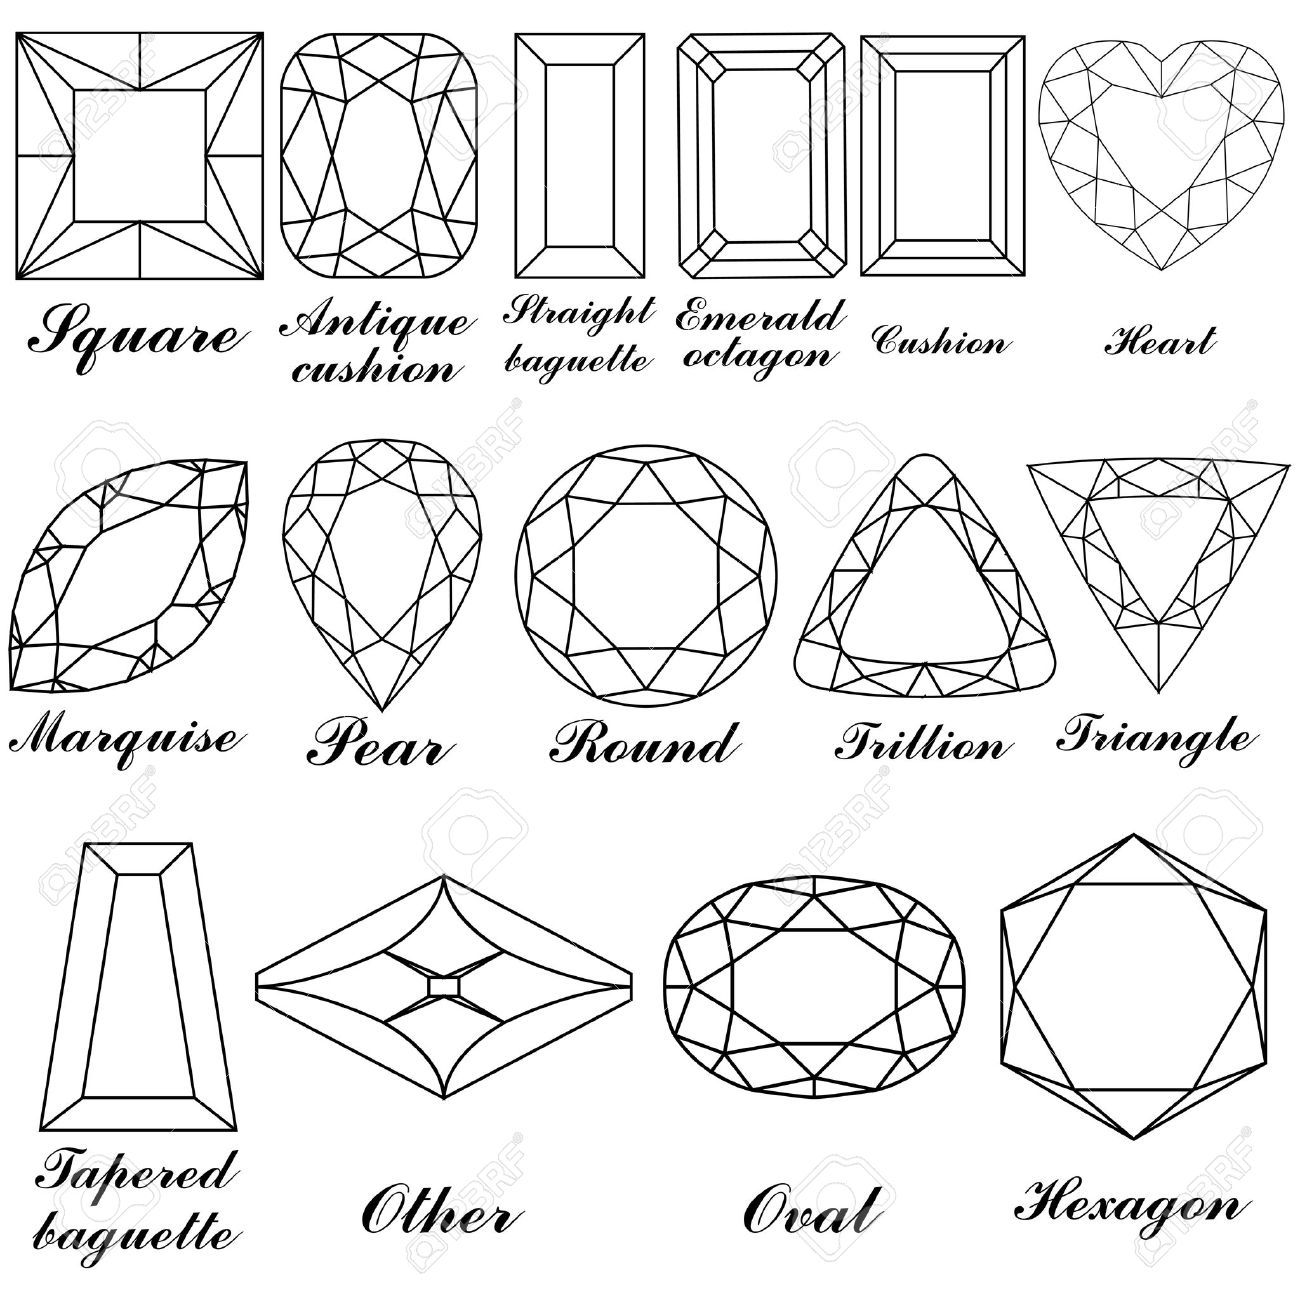 faceted jewel line drawing - Google Search | Jewel drawing ...